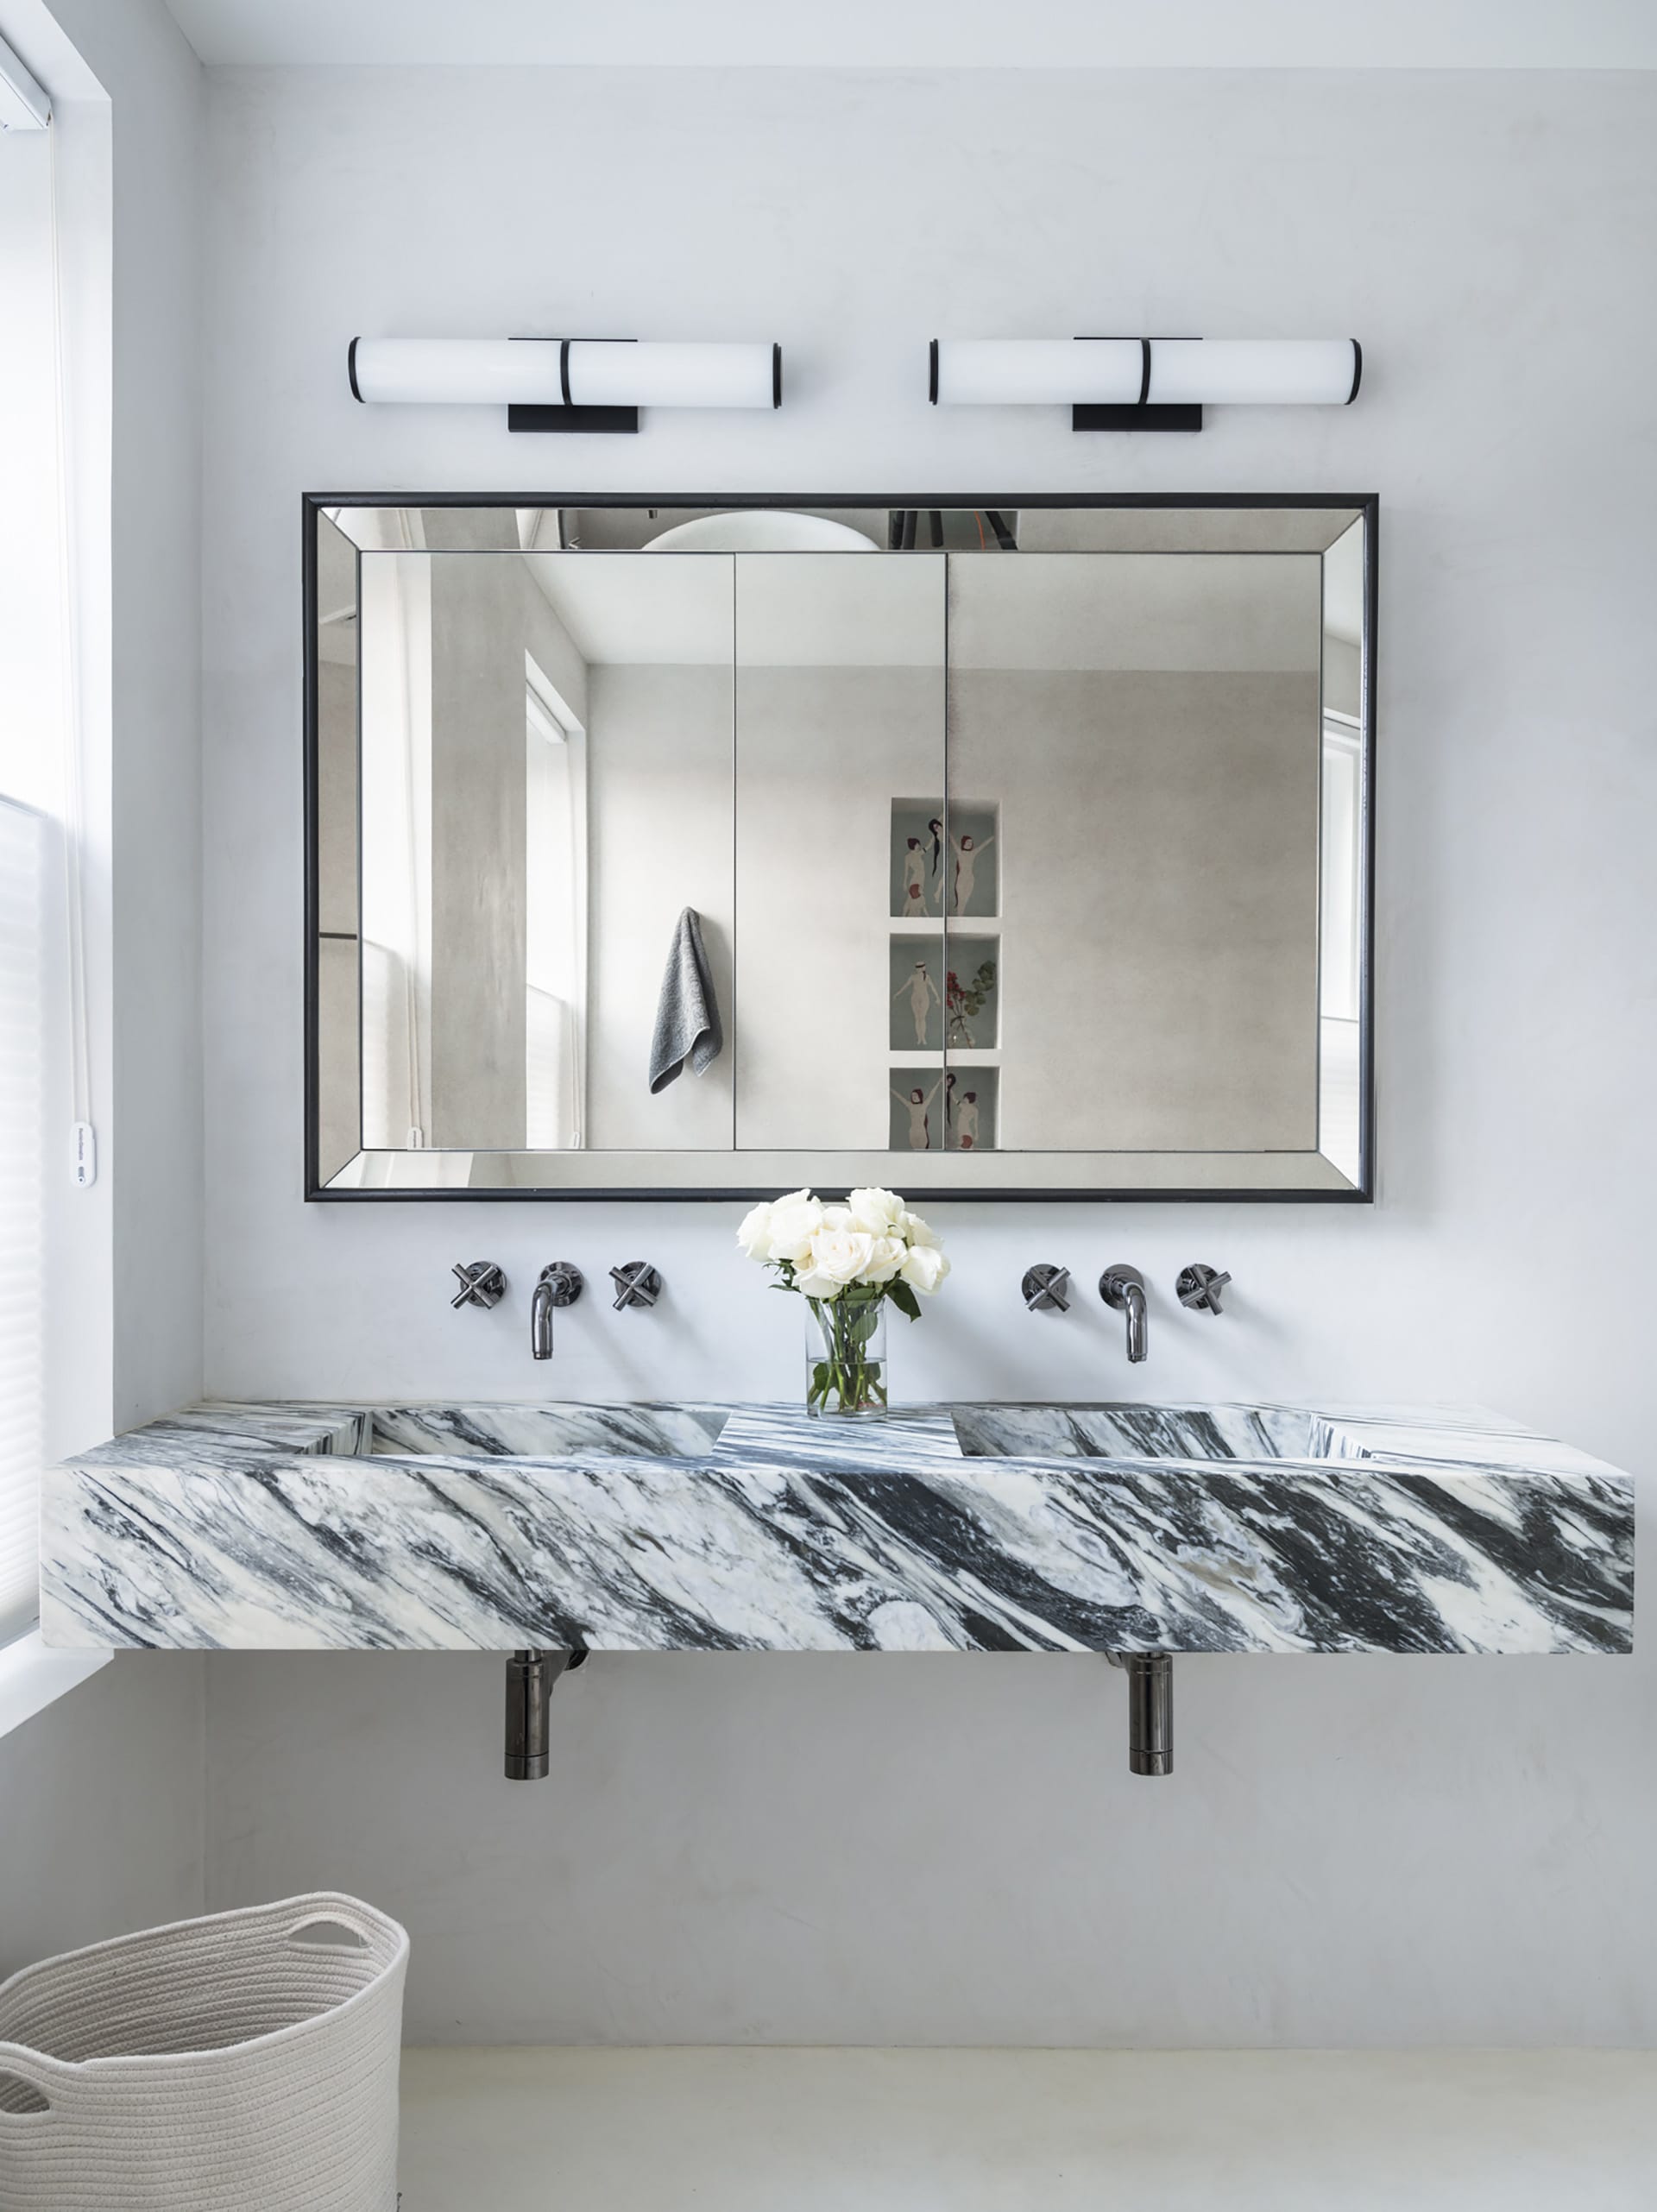 Primary bath with bold marble Jack and Jill vanity